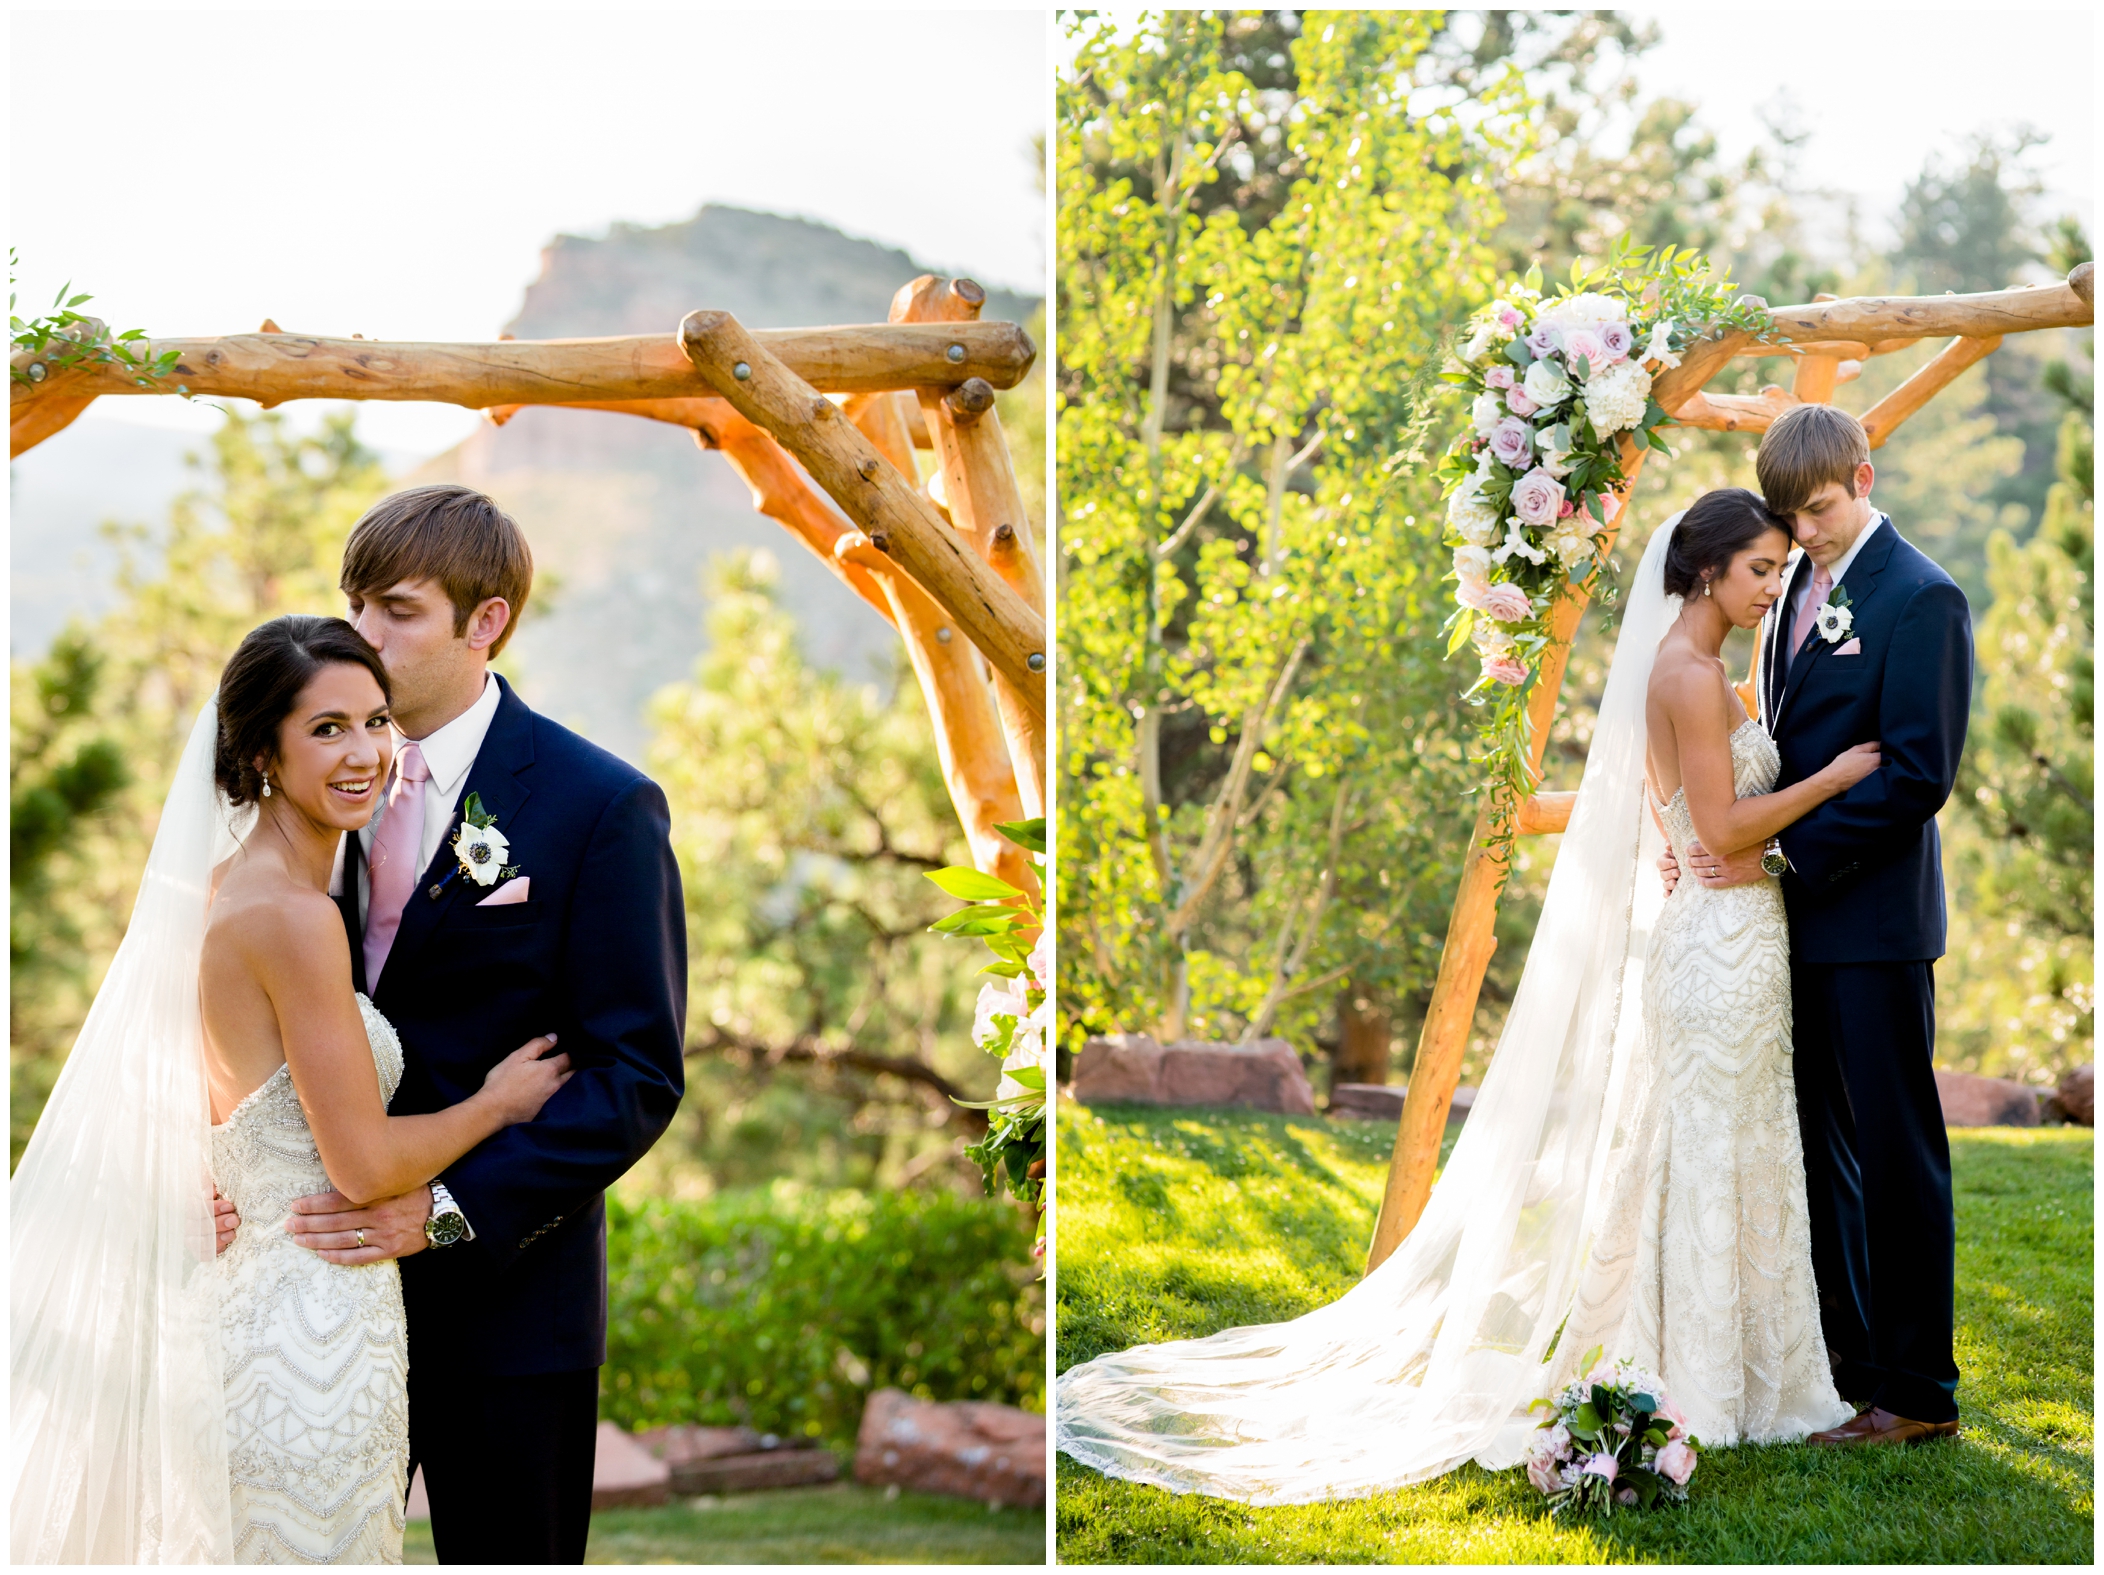 Lyons bride and groom by Colorado wedding photographer Plum Pretty Photography 